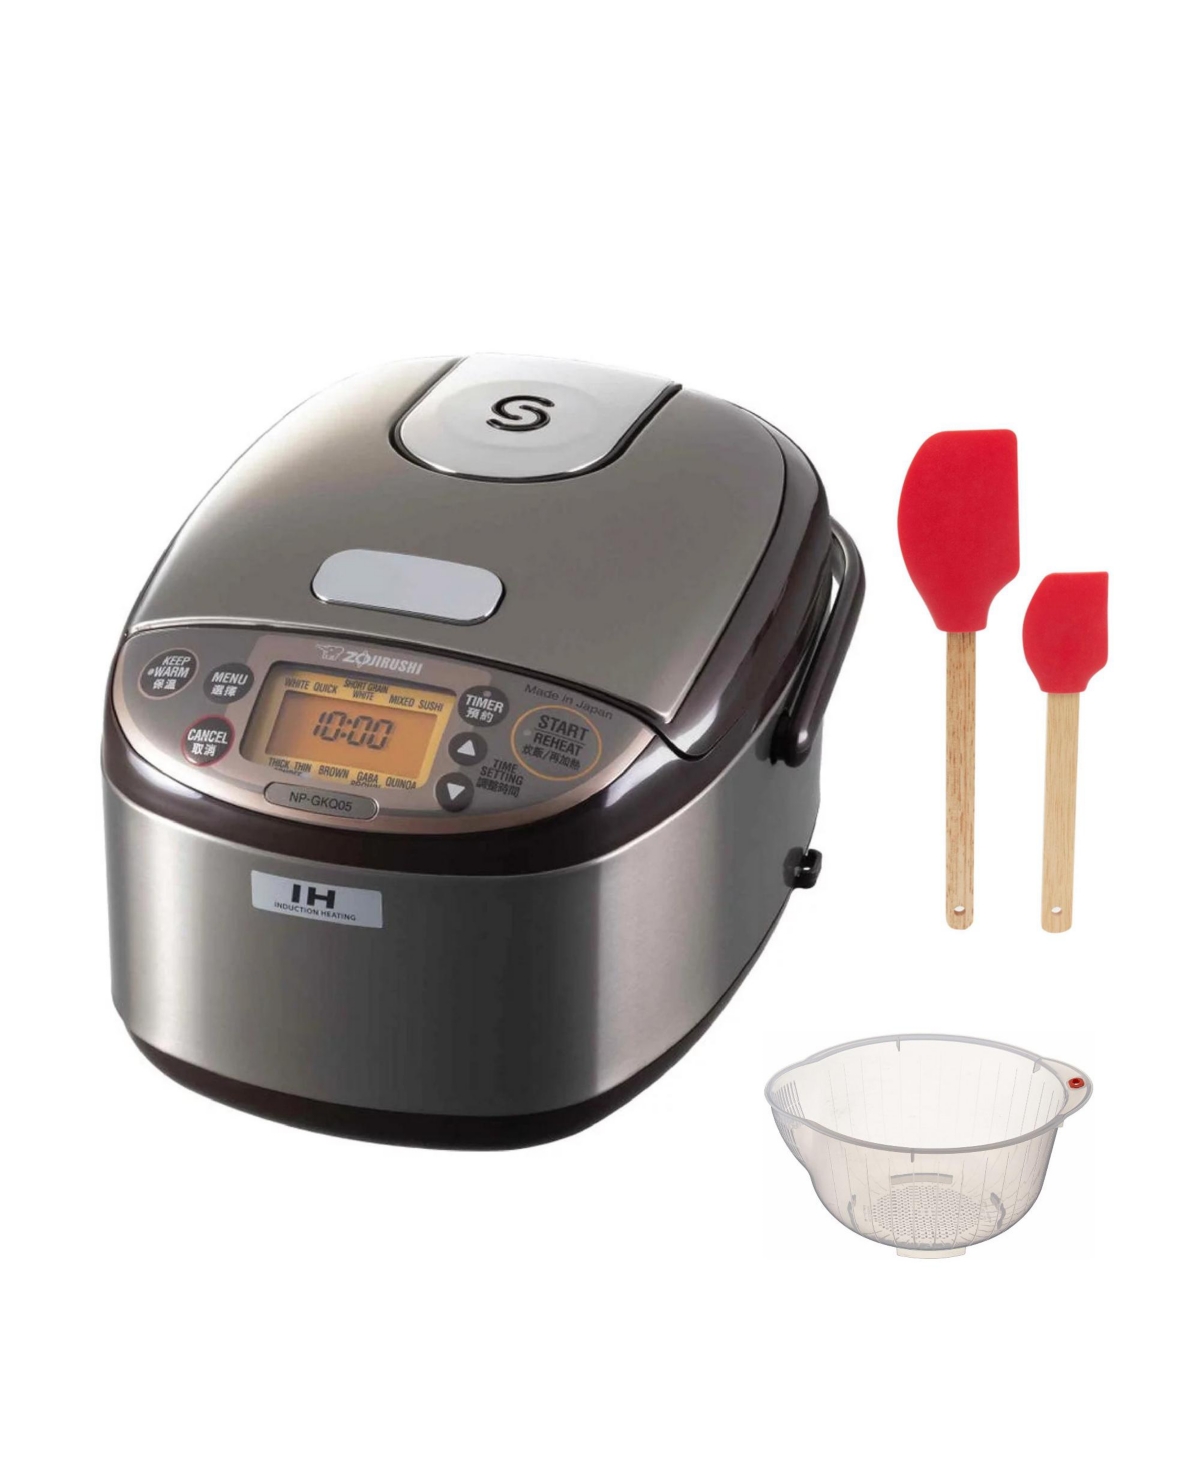 Induction Heating System Rice Cooker And Warmer With Accessory - Gold